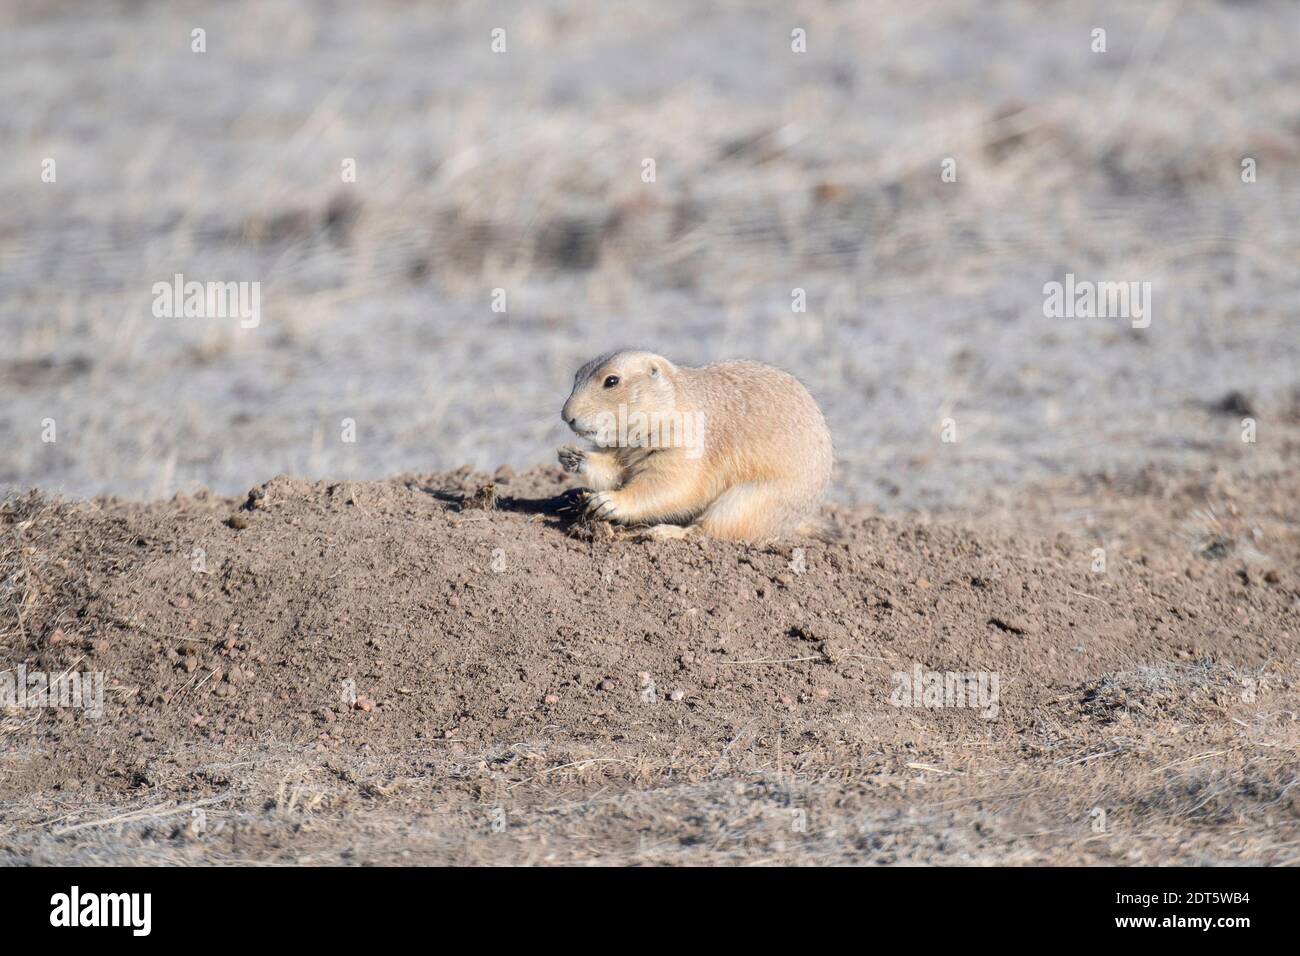 A Black-tailed Prairie Dog (Cynomys ludovicianus) at its Burrow Shown Eating a Prickly Pear Cactus on Grassland in Colorado Stock Photo